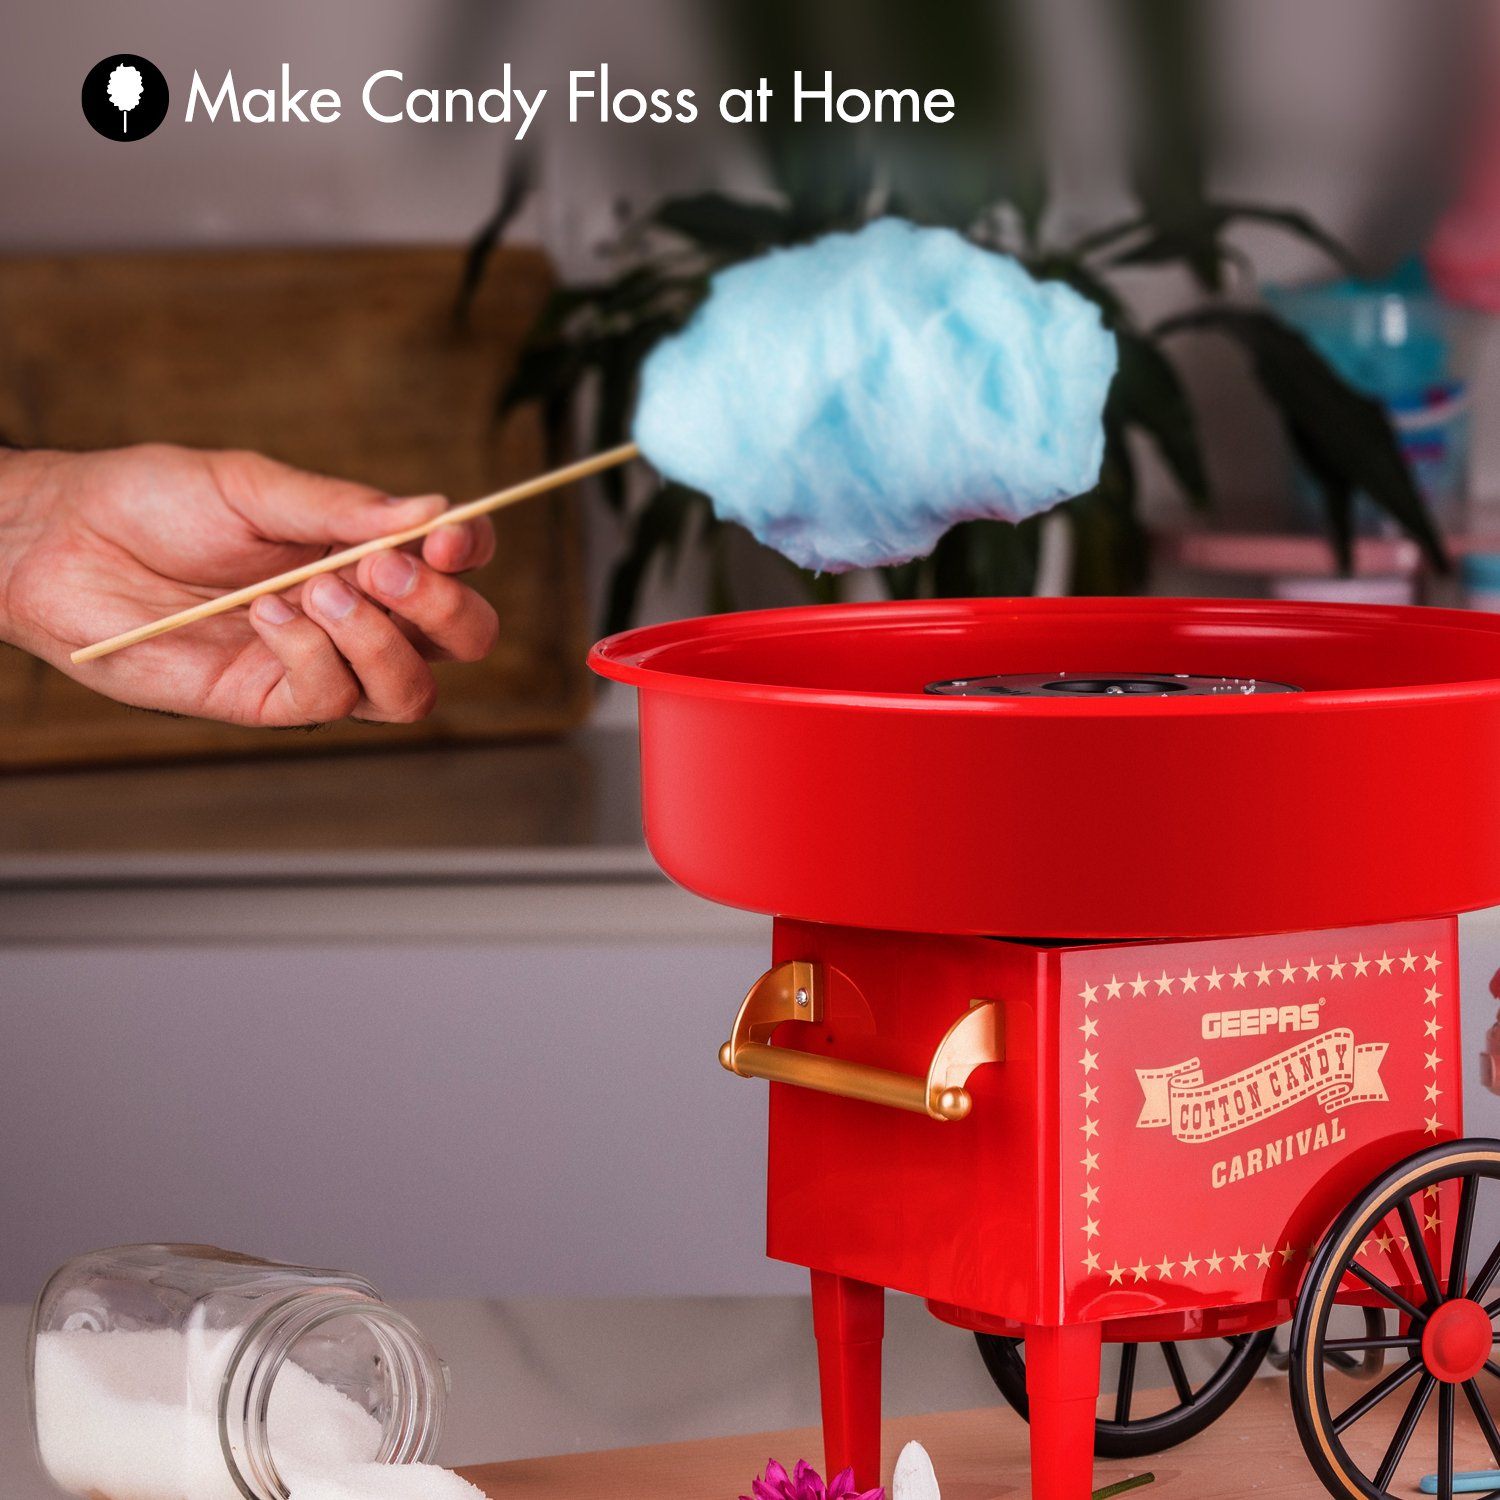 500W Cotton Candy Maker for Birthdays, Parties and Celebrations Candy Maker Geepas | For you. For life. 